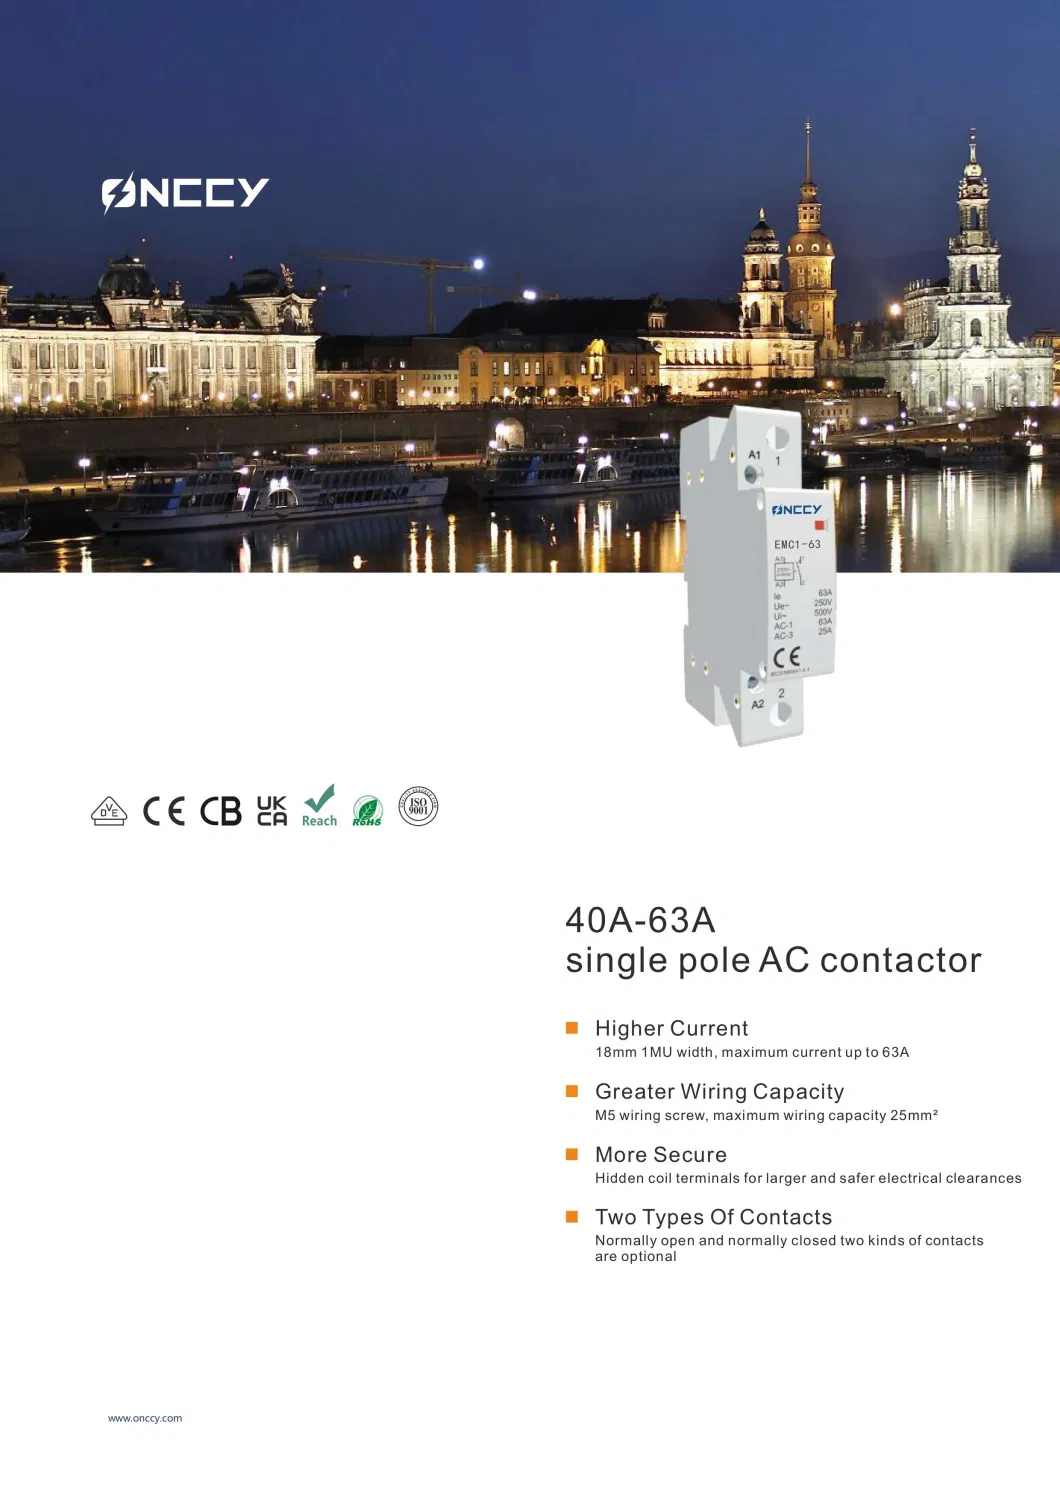 AC Modular Contactor 2 Pole 1, 2, 3modules 16A-125A for Solar PV, Battery Energy Storage